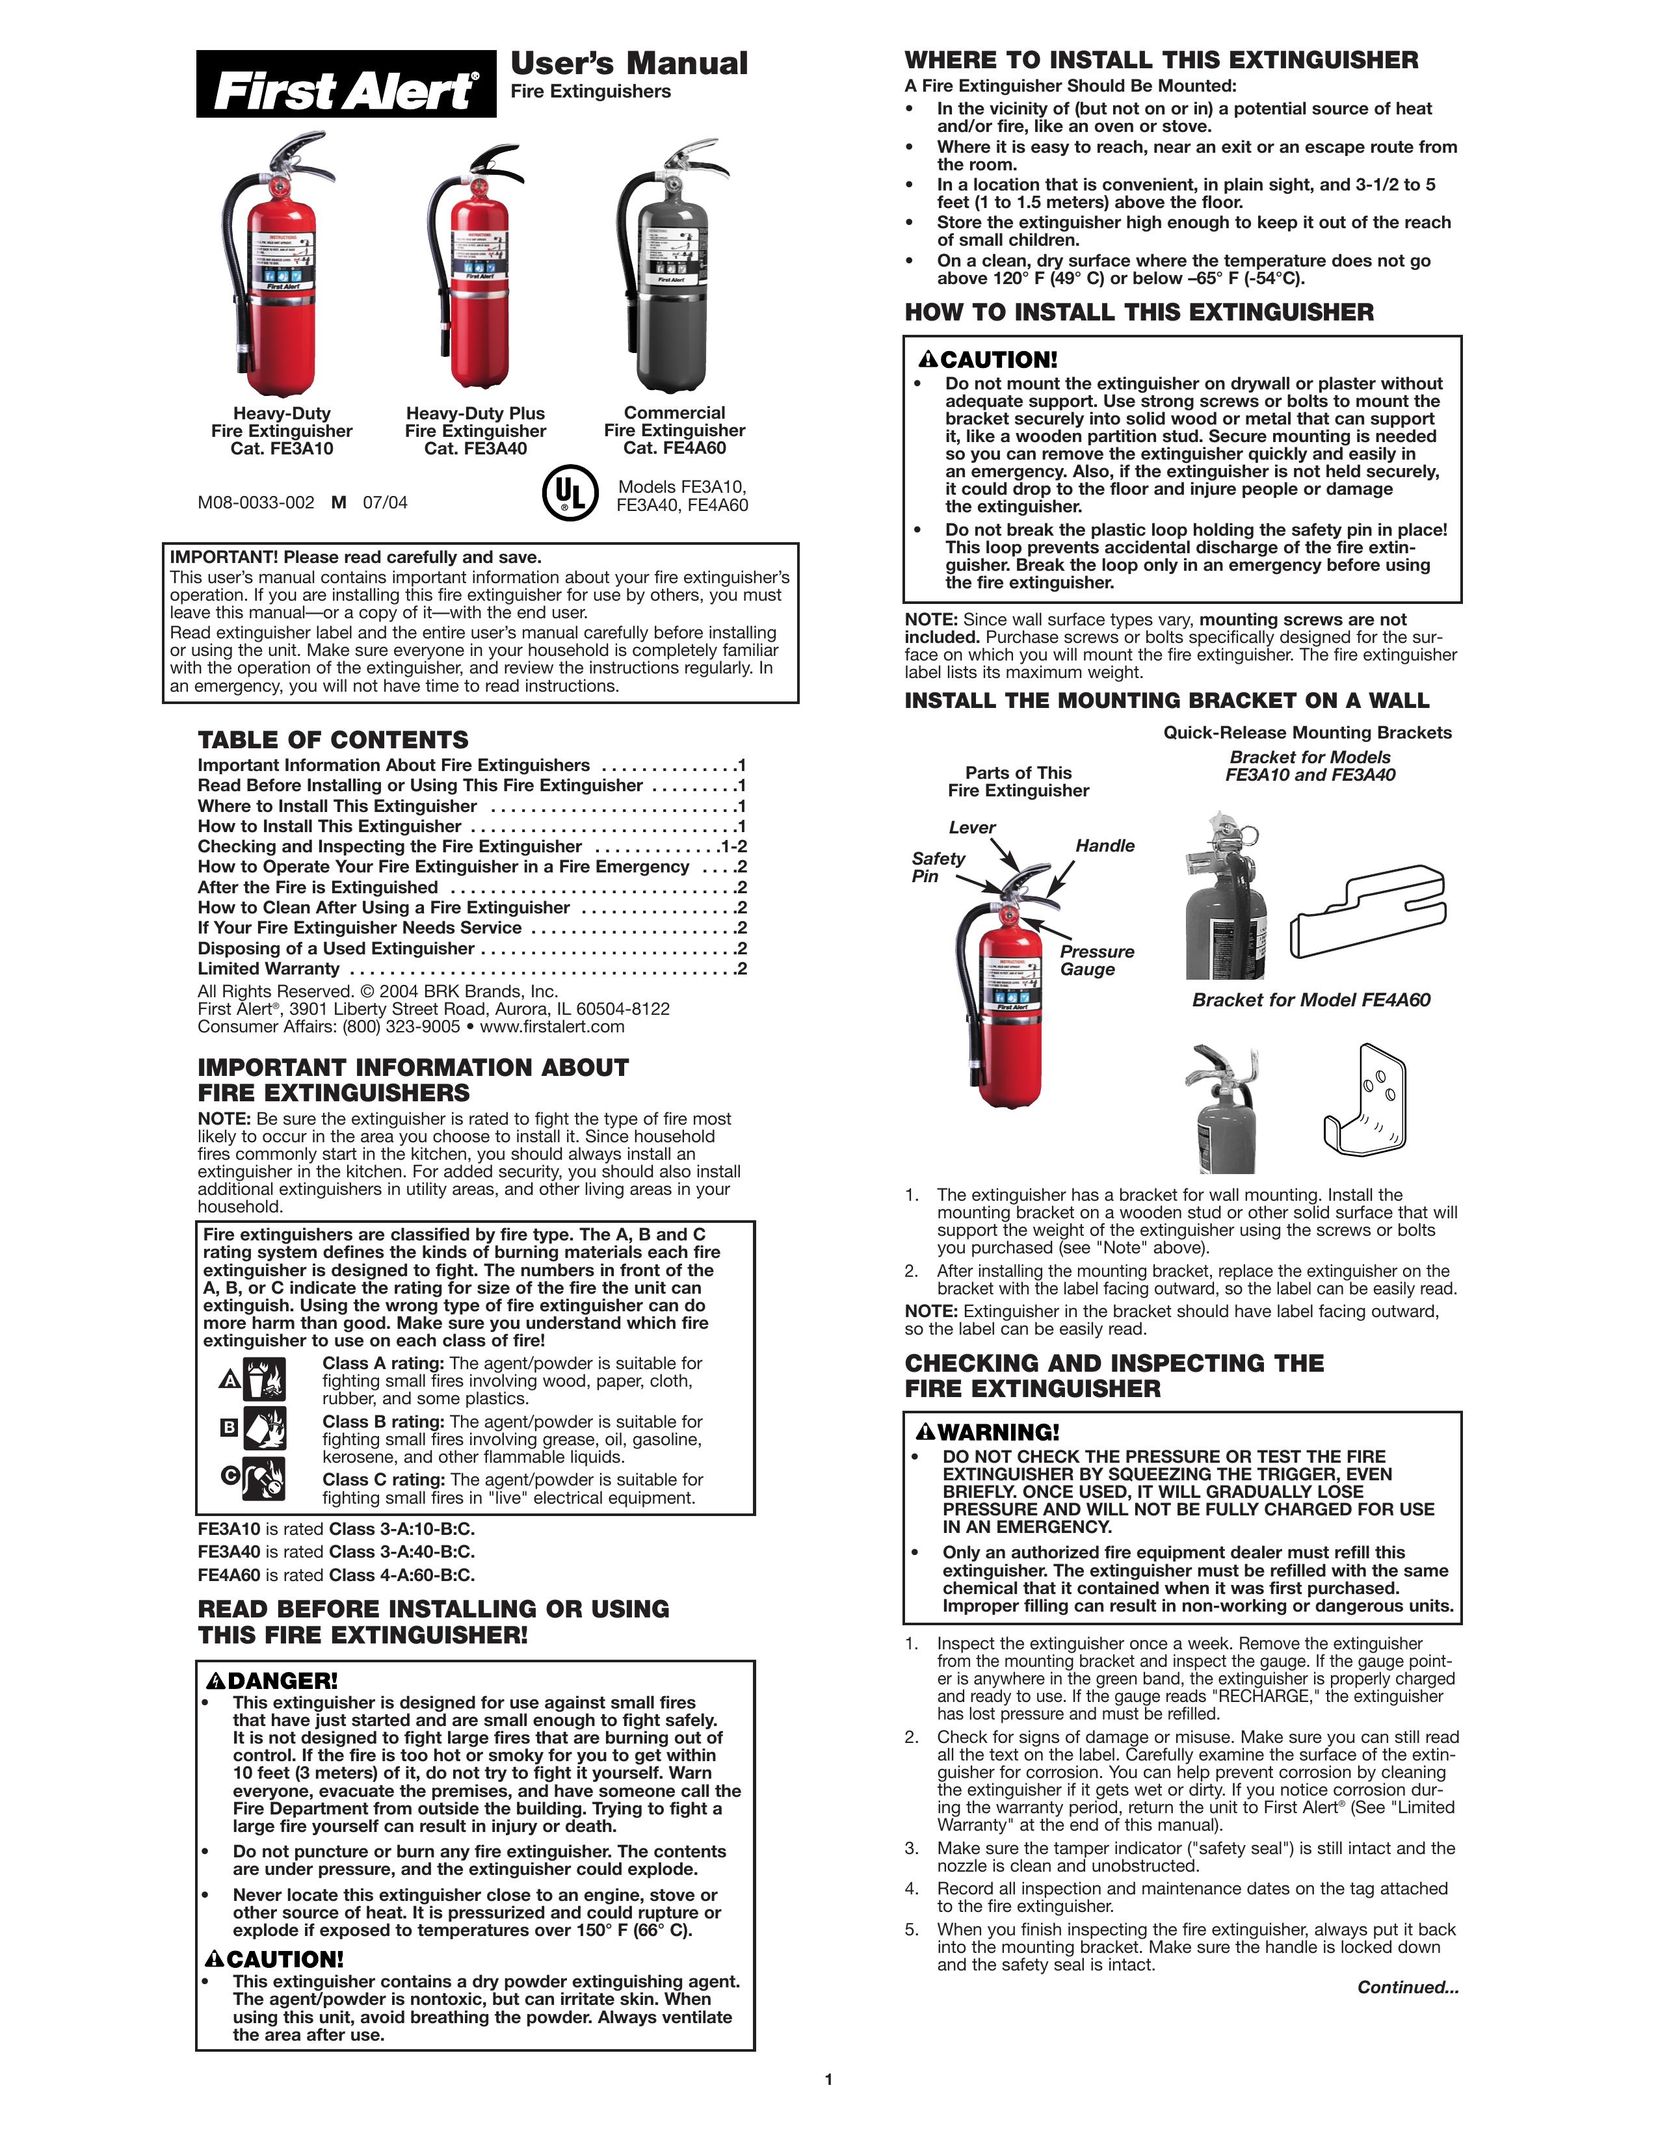 First Alert FE3A10 Fire Extinguisher User Manual